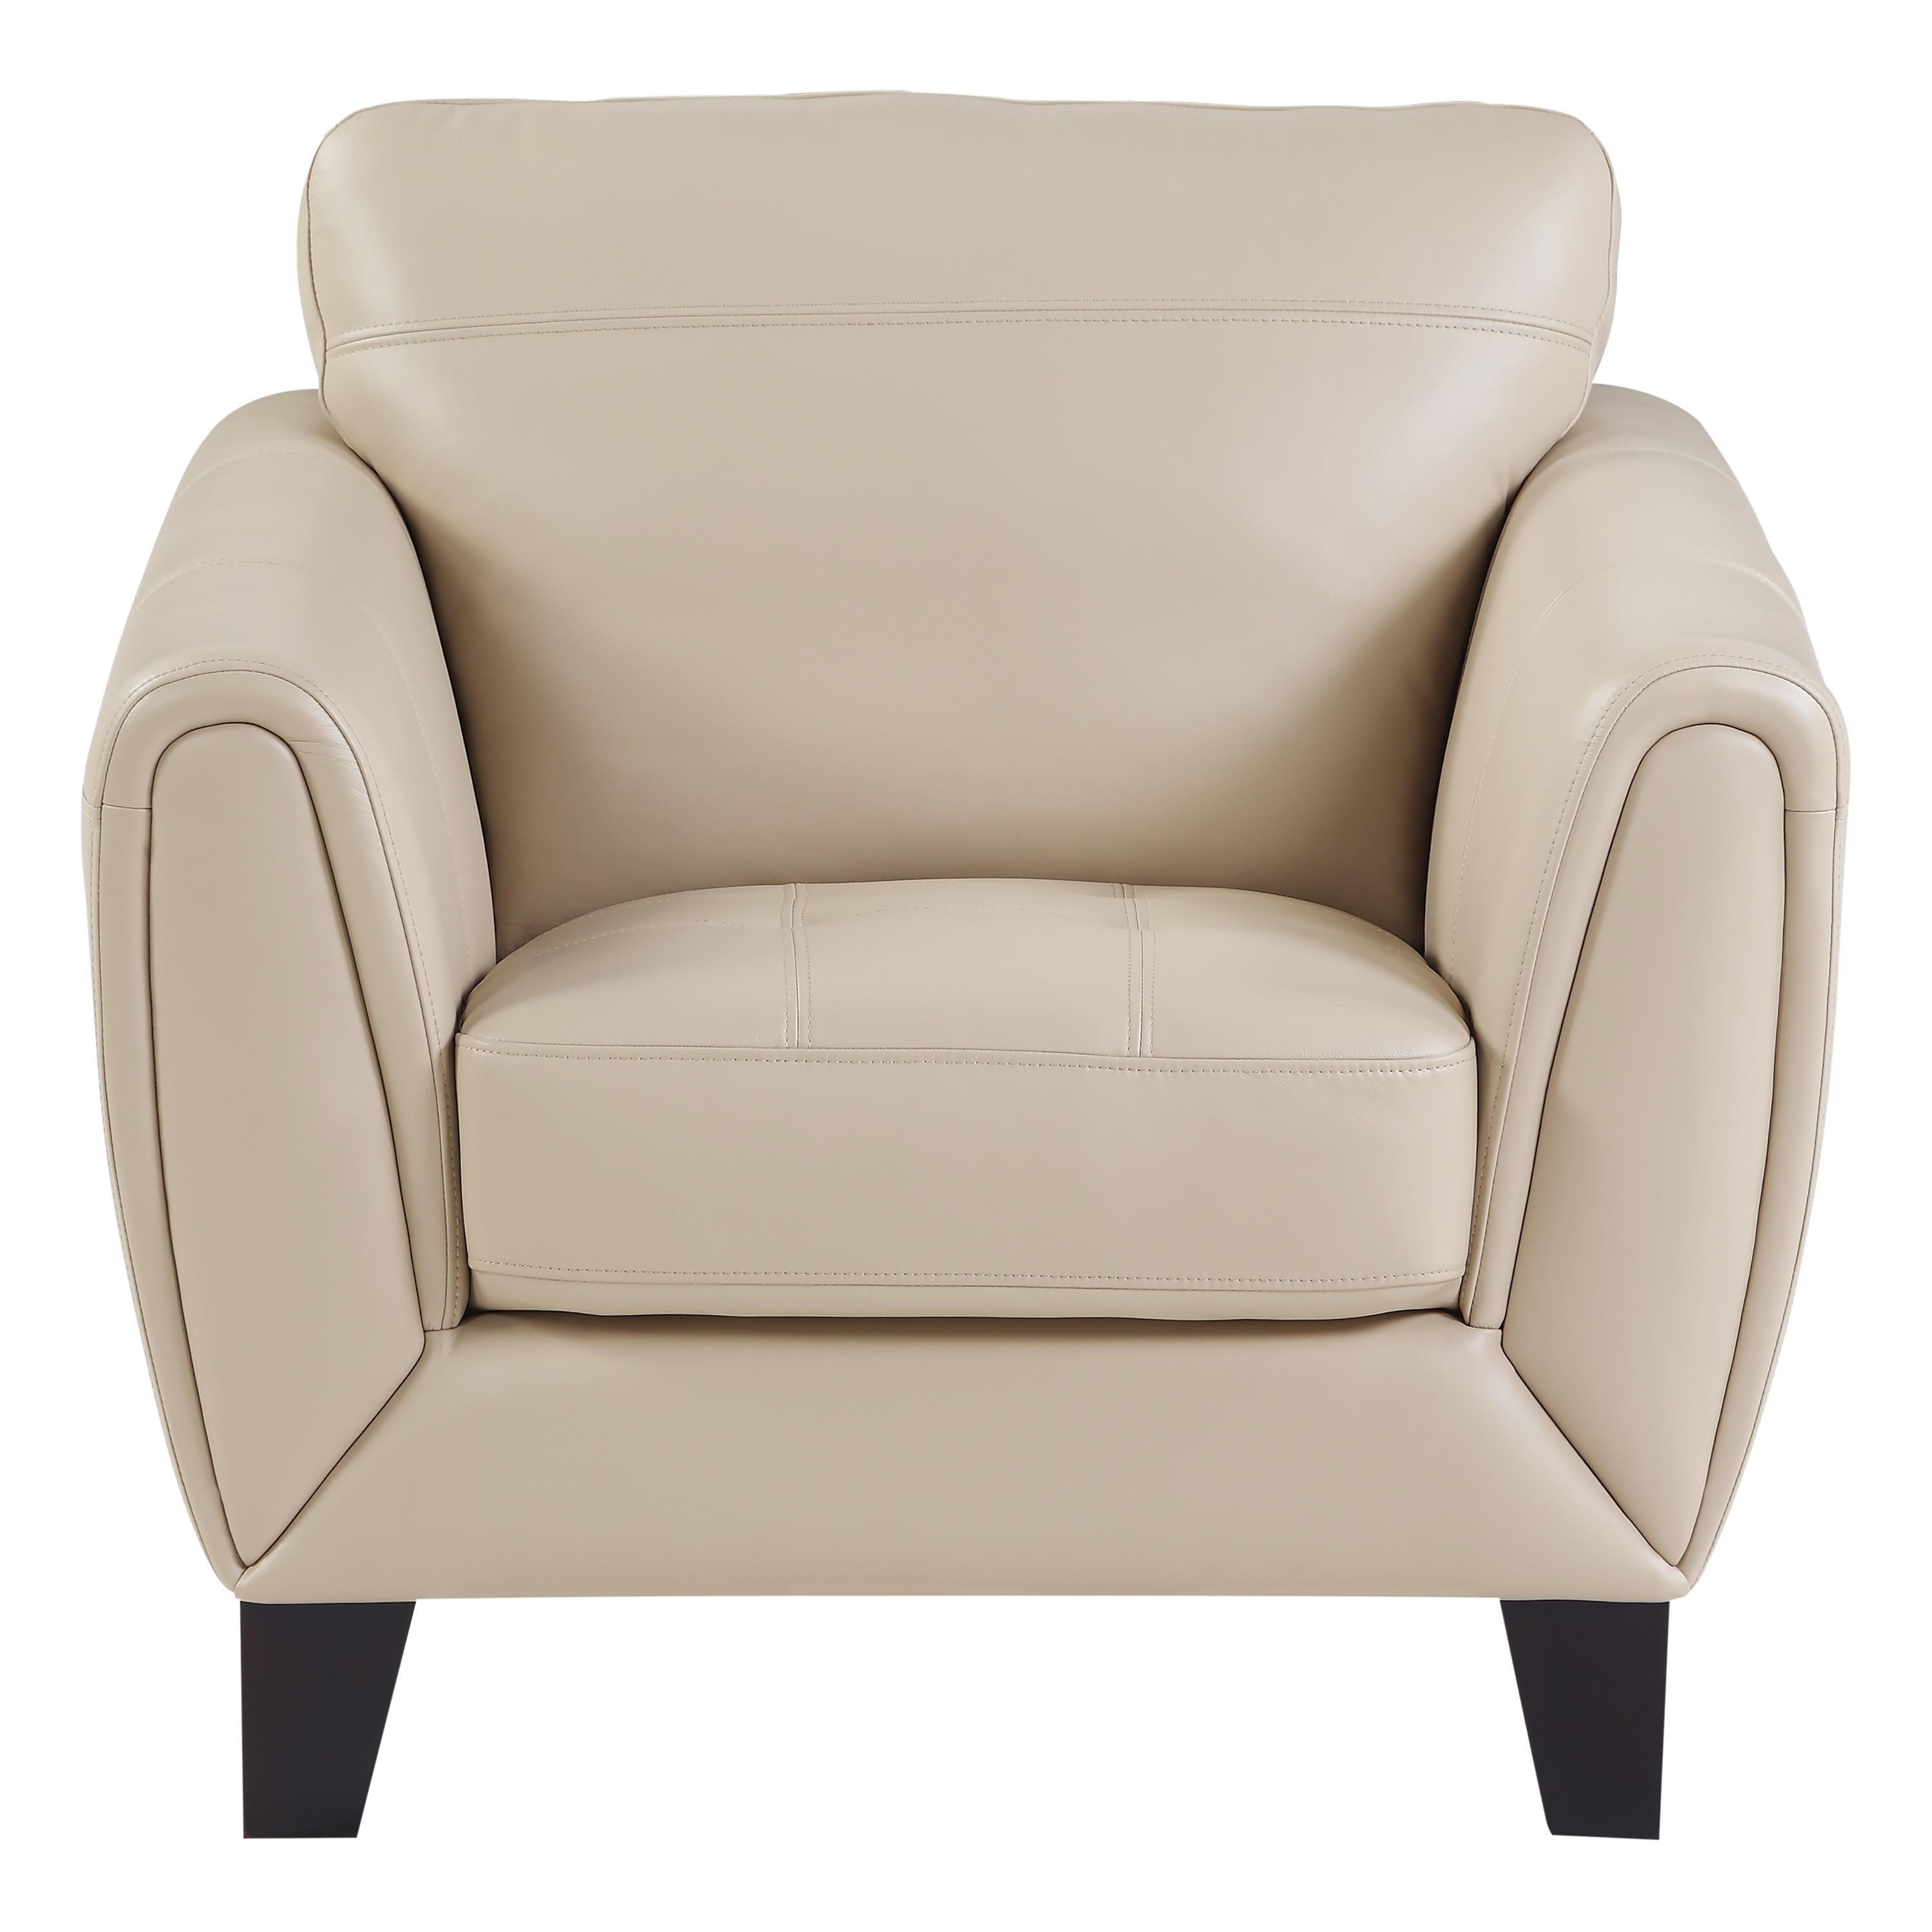 Modern Arm Chair 9460BE-1 Spivey 9460BE-1 in Beige Leather